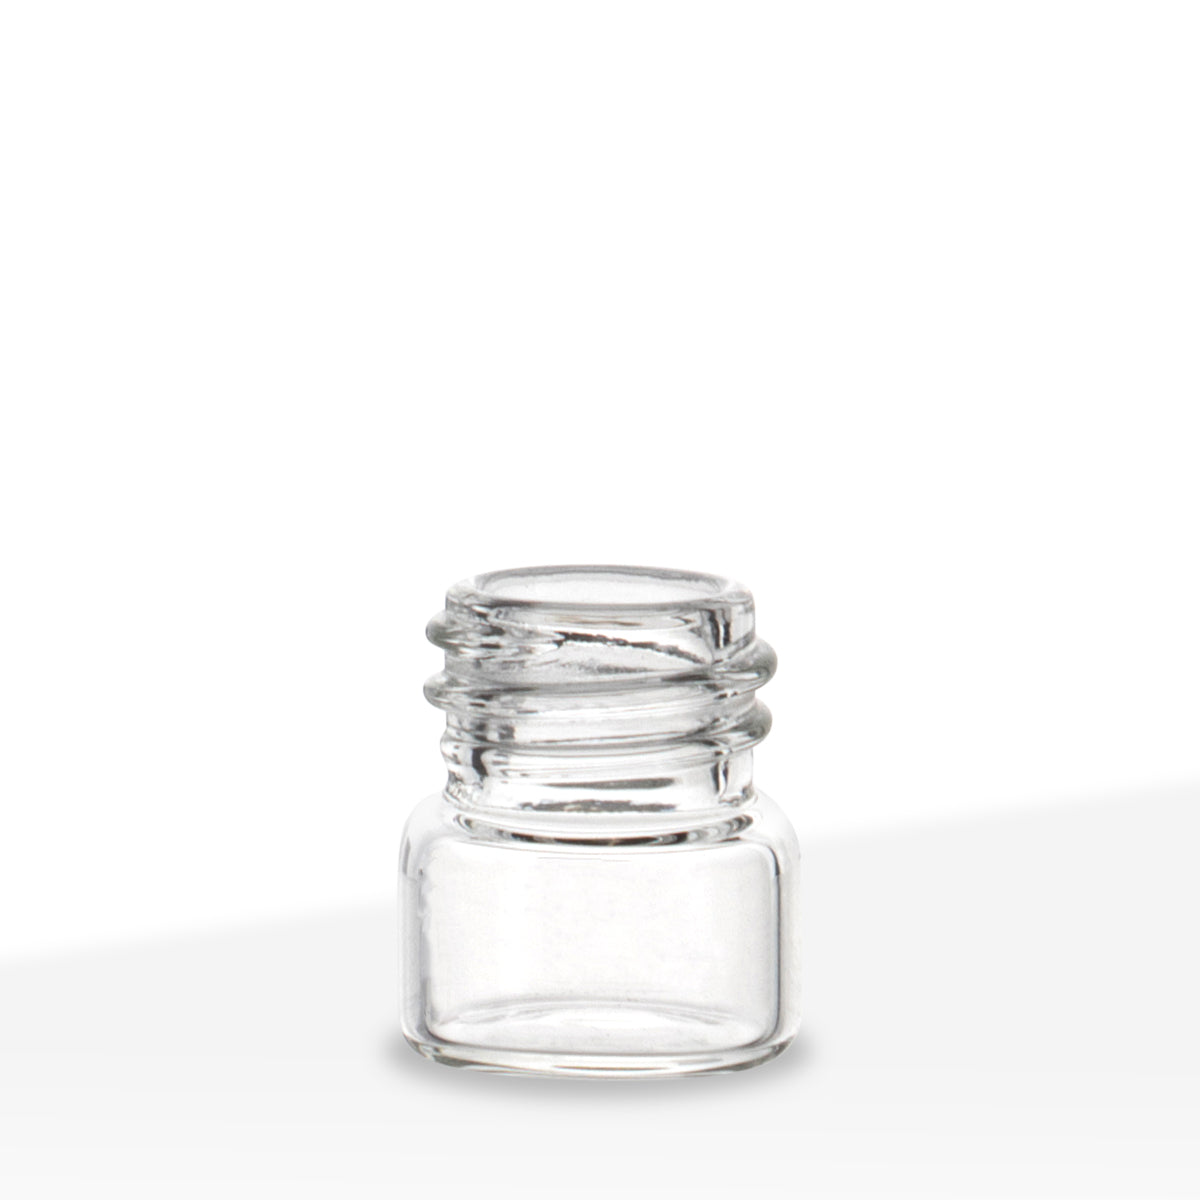 GLASS VIAL CLEAR VC131517 - 144 CT